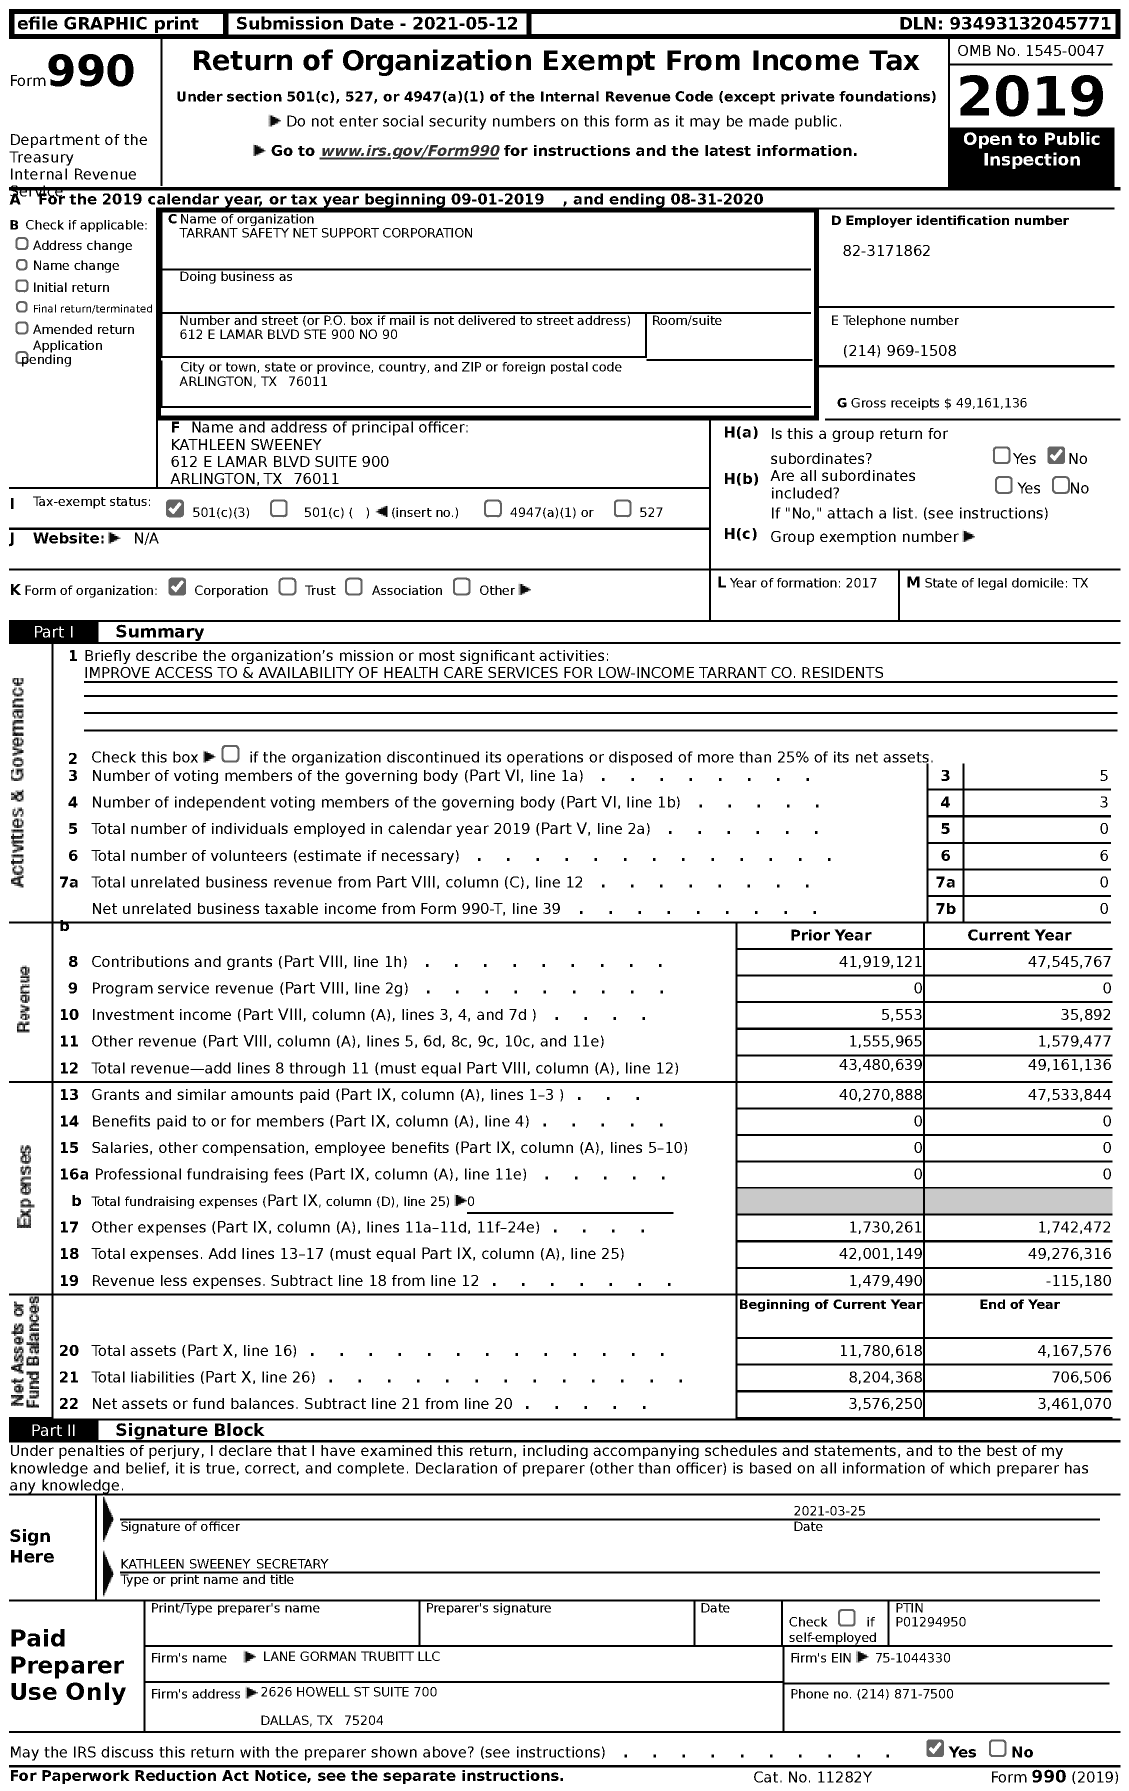 Image of first page of 2019 Form 990 for Tarrant Safety Net Support Corporation